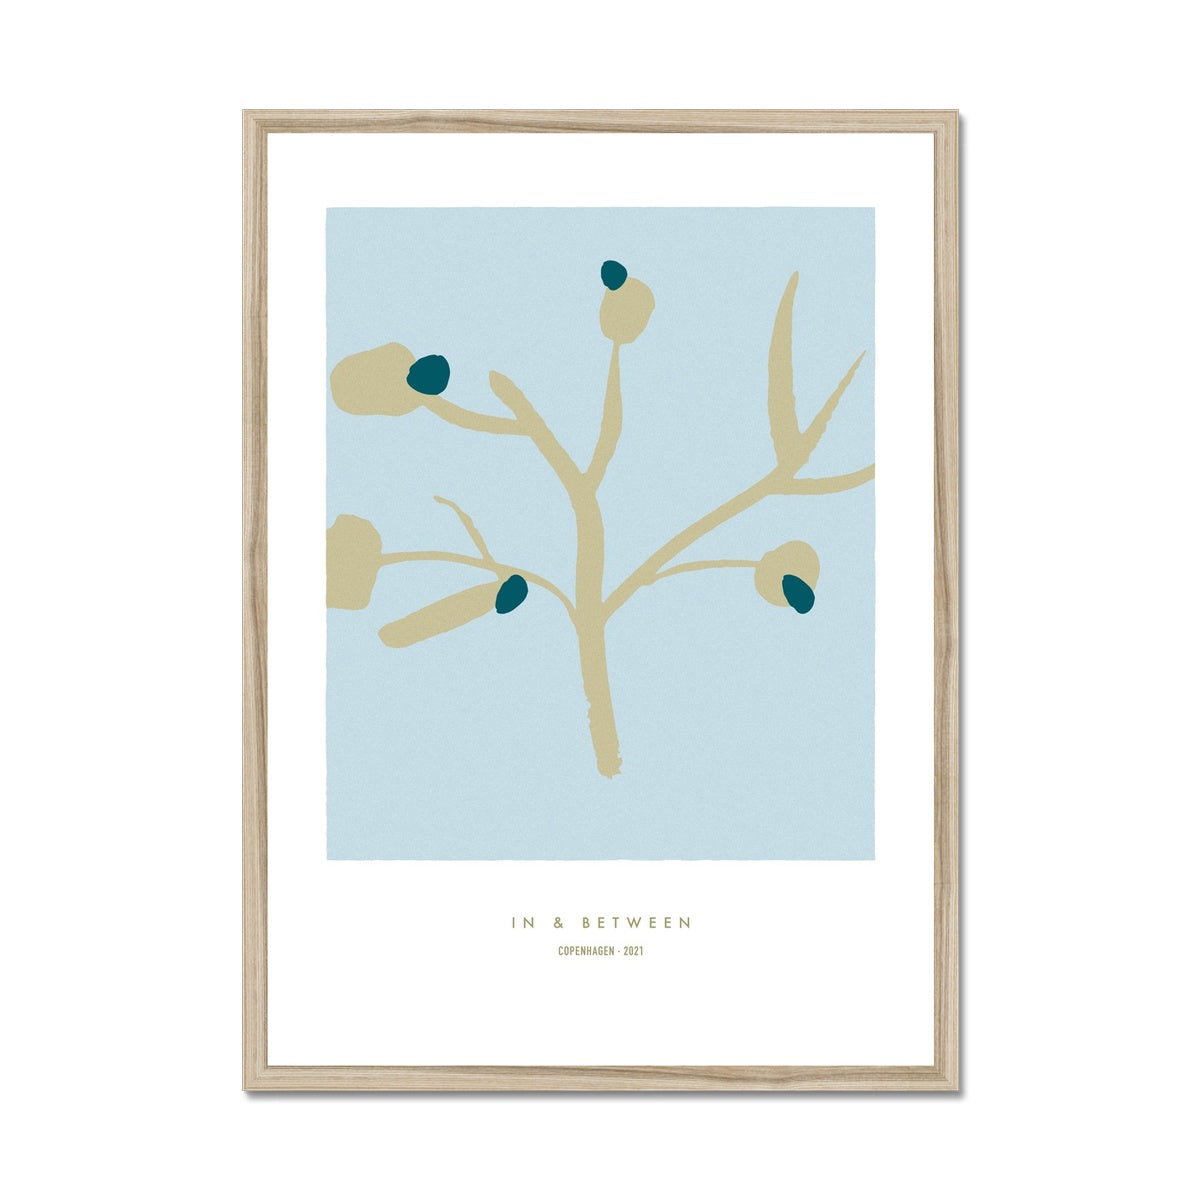 Upright golden olive tree branch with dark green olives on a light blue background in a natural wooden frame.